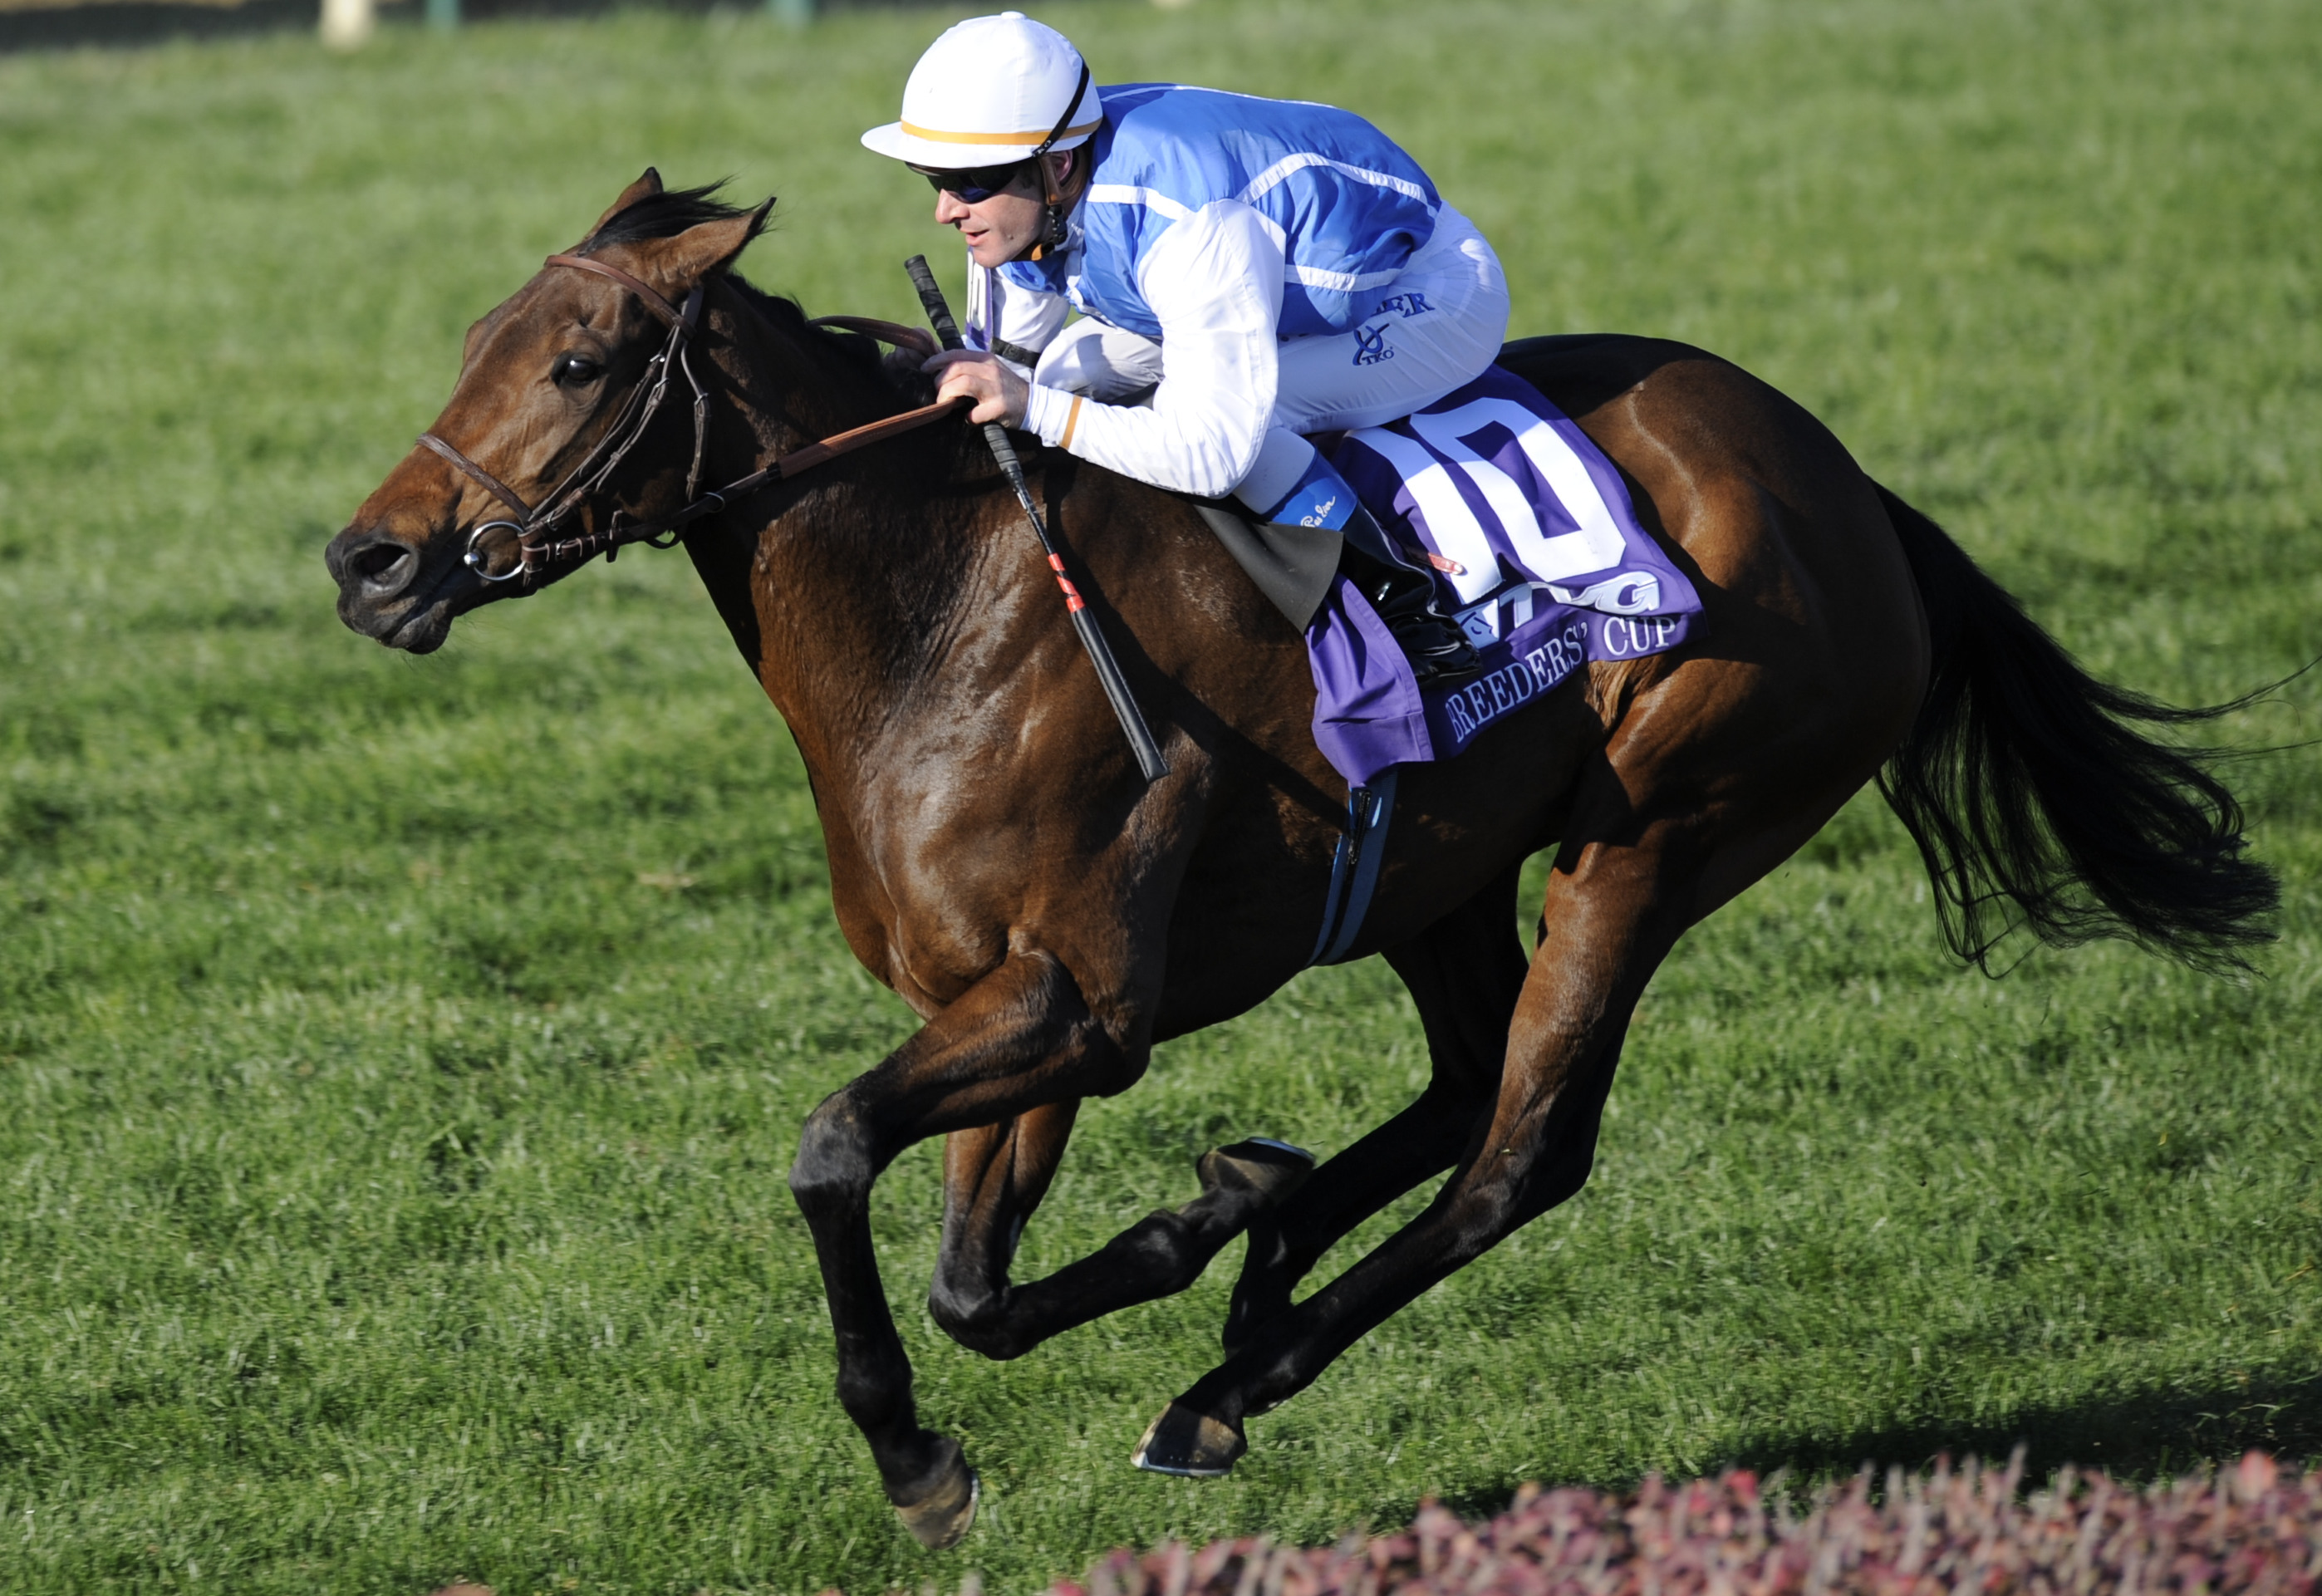 Goldikova (Olivier Peslier up) in the 2010 Breeders' Cup Mile at Churchill Downs (Breeders' Cup Photo)